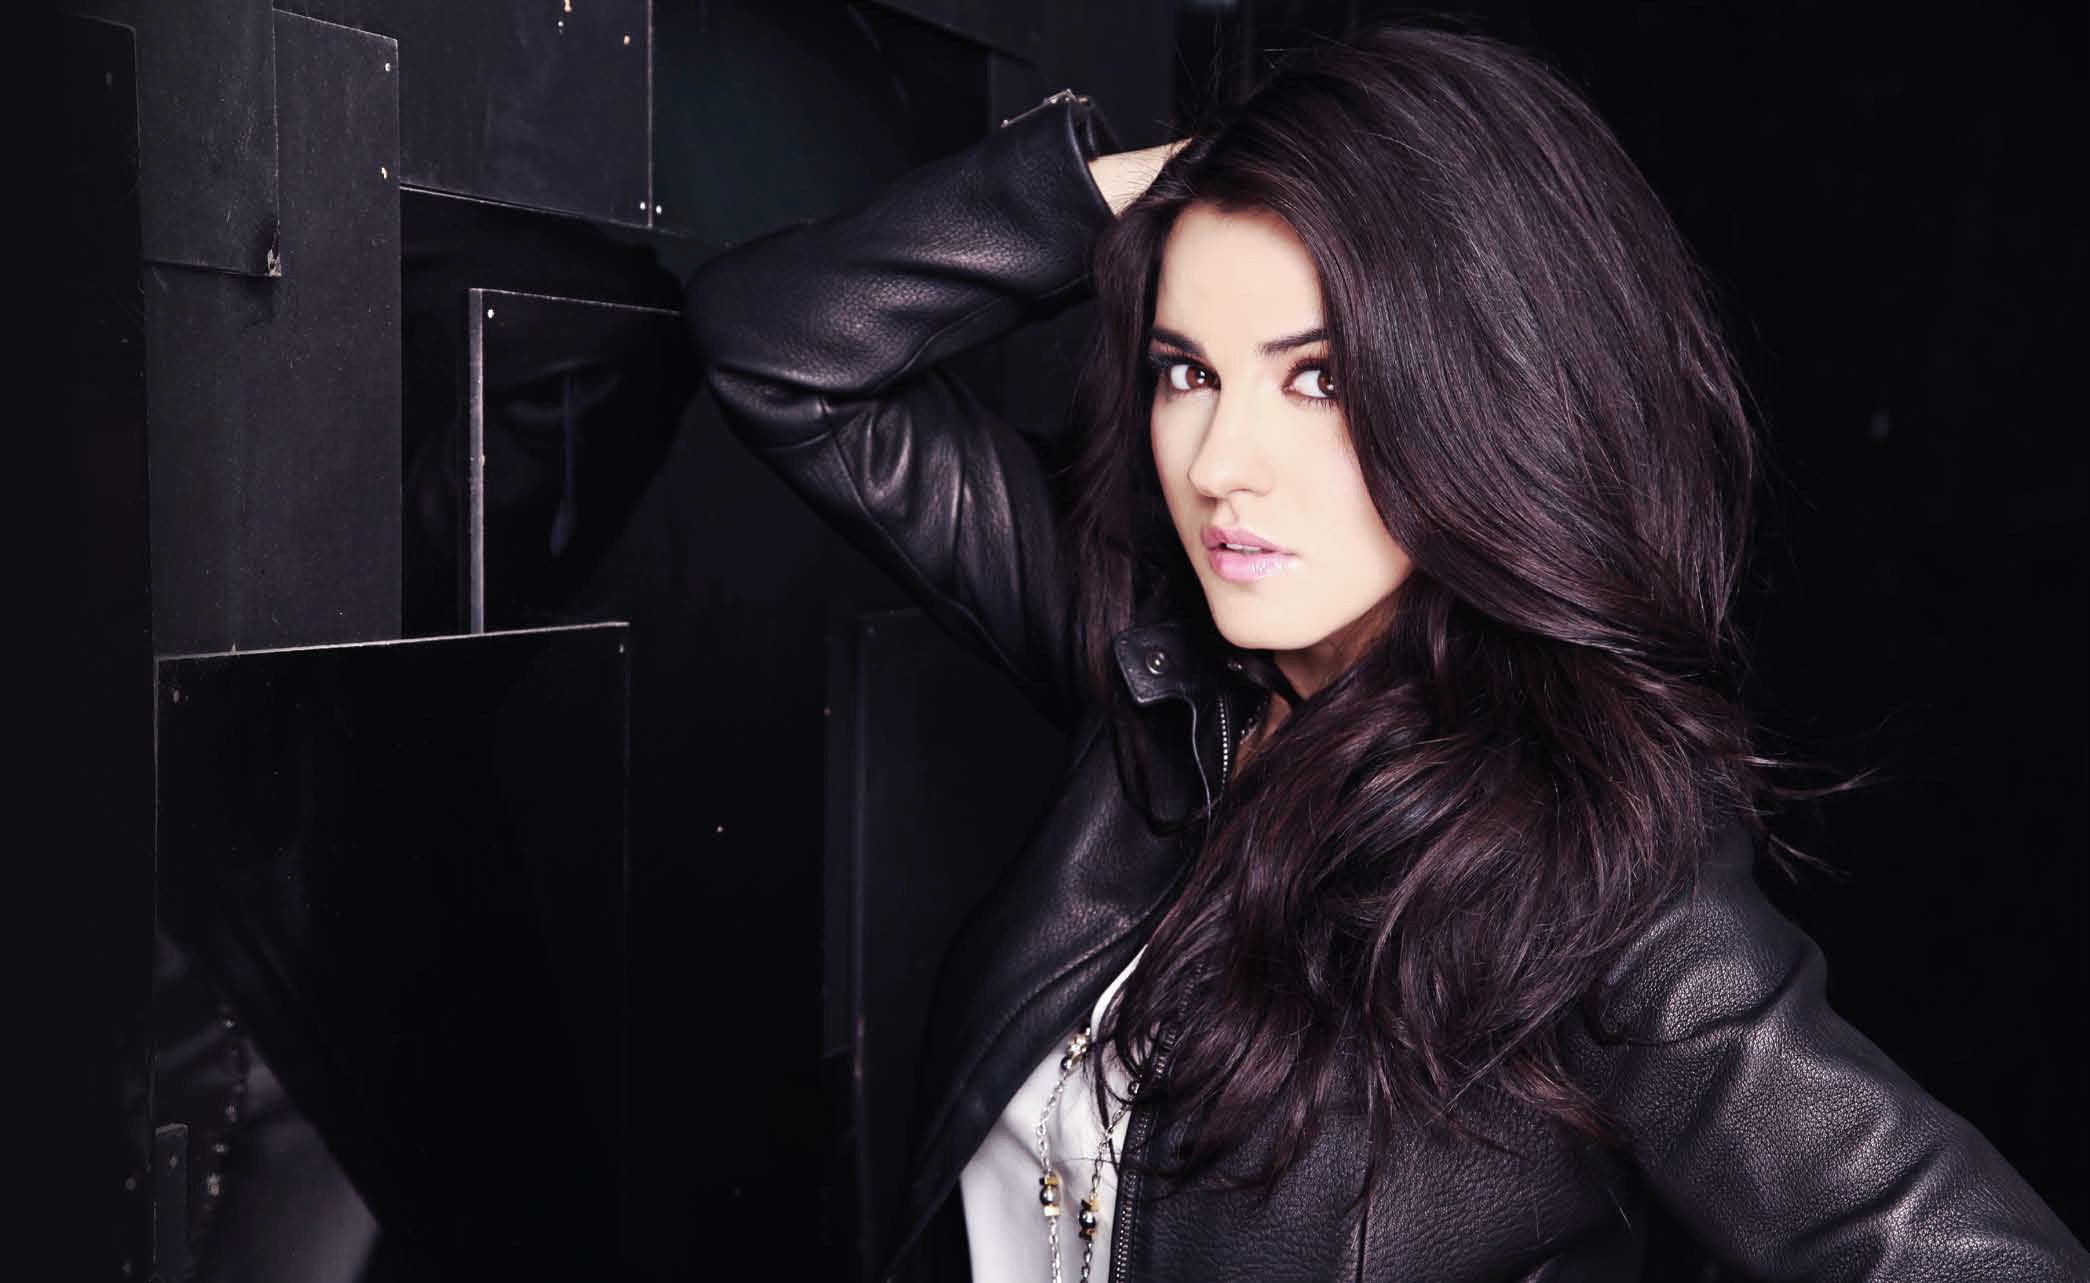 Maite Perroni Brunette Latinas Women Leather Clothing Jacket Hands On Head Actress Mexican Model Lea 2090x1283